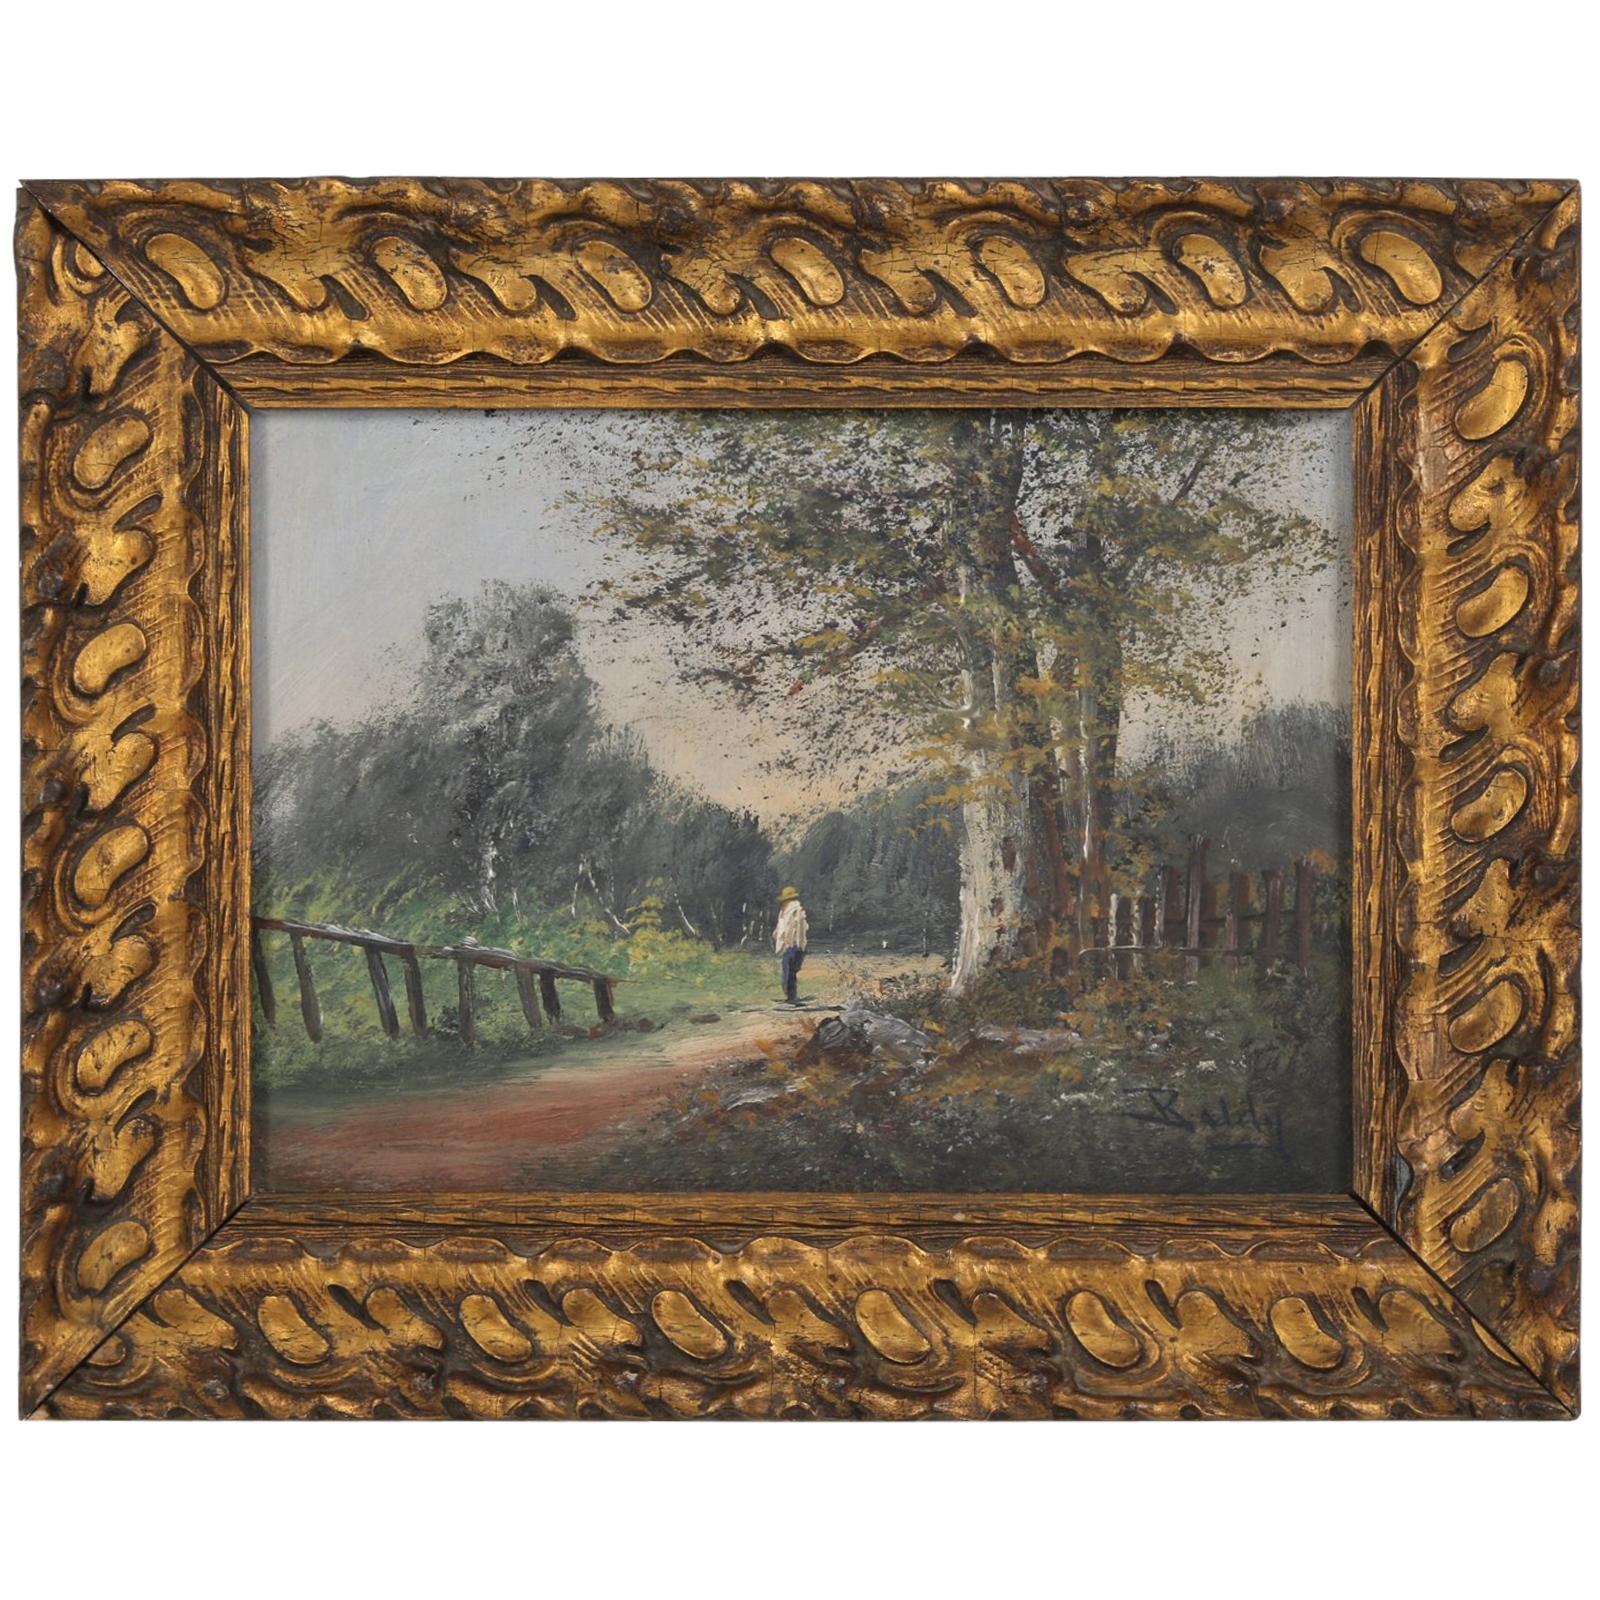 French Antique Victorian Landscape Oil Painting DIGITAL PRINT Wall Art Vintage French Country Cottage Landscape